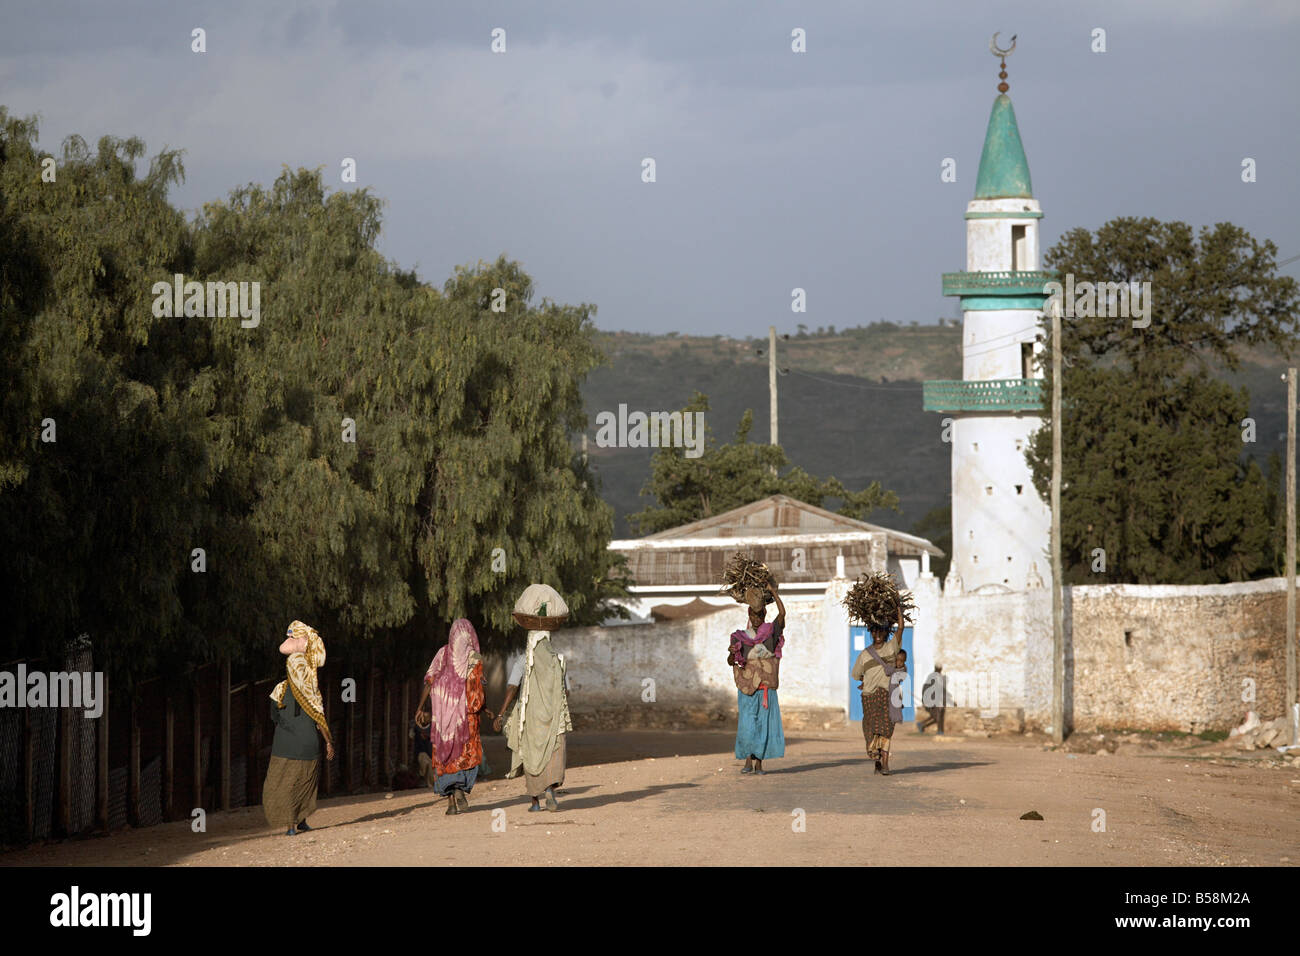 Women carry their wares on their heads, near a mosque in the city of Harar, Ethiopia, Africa Stock Photo